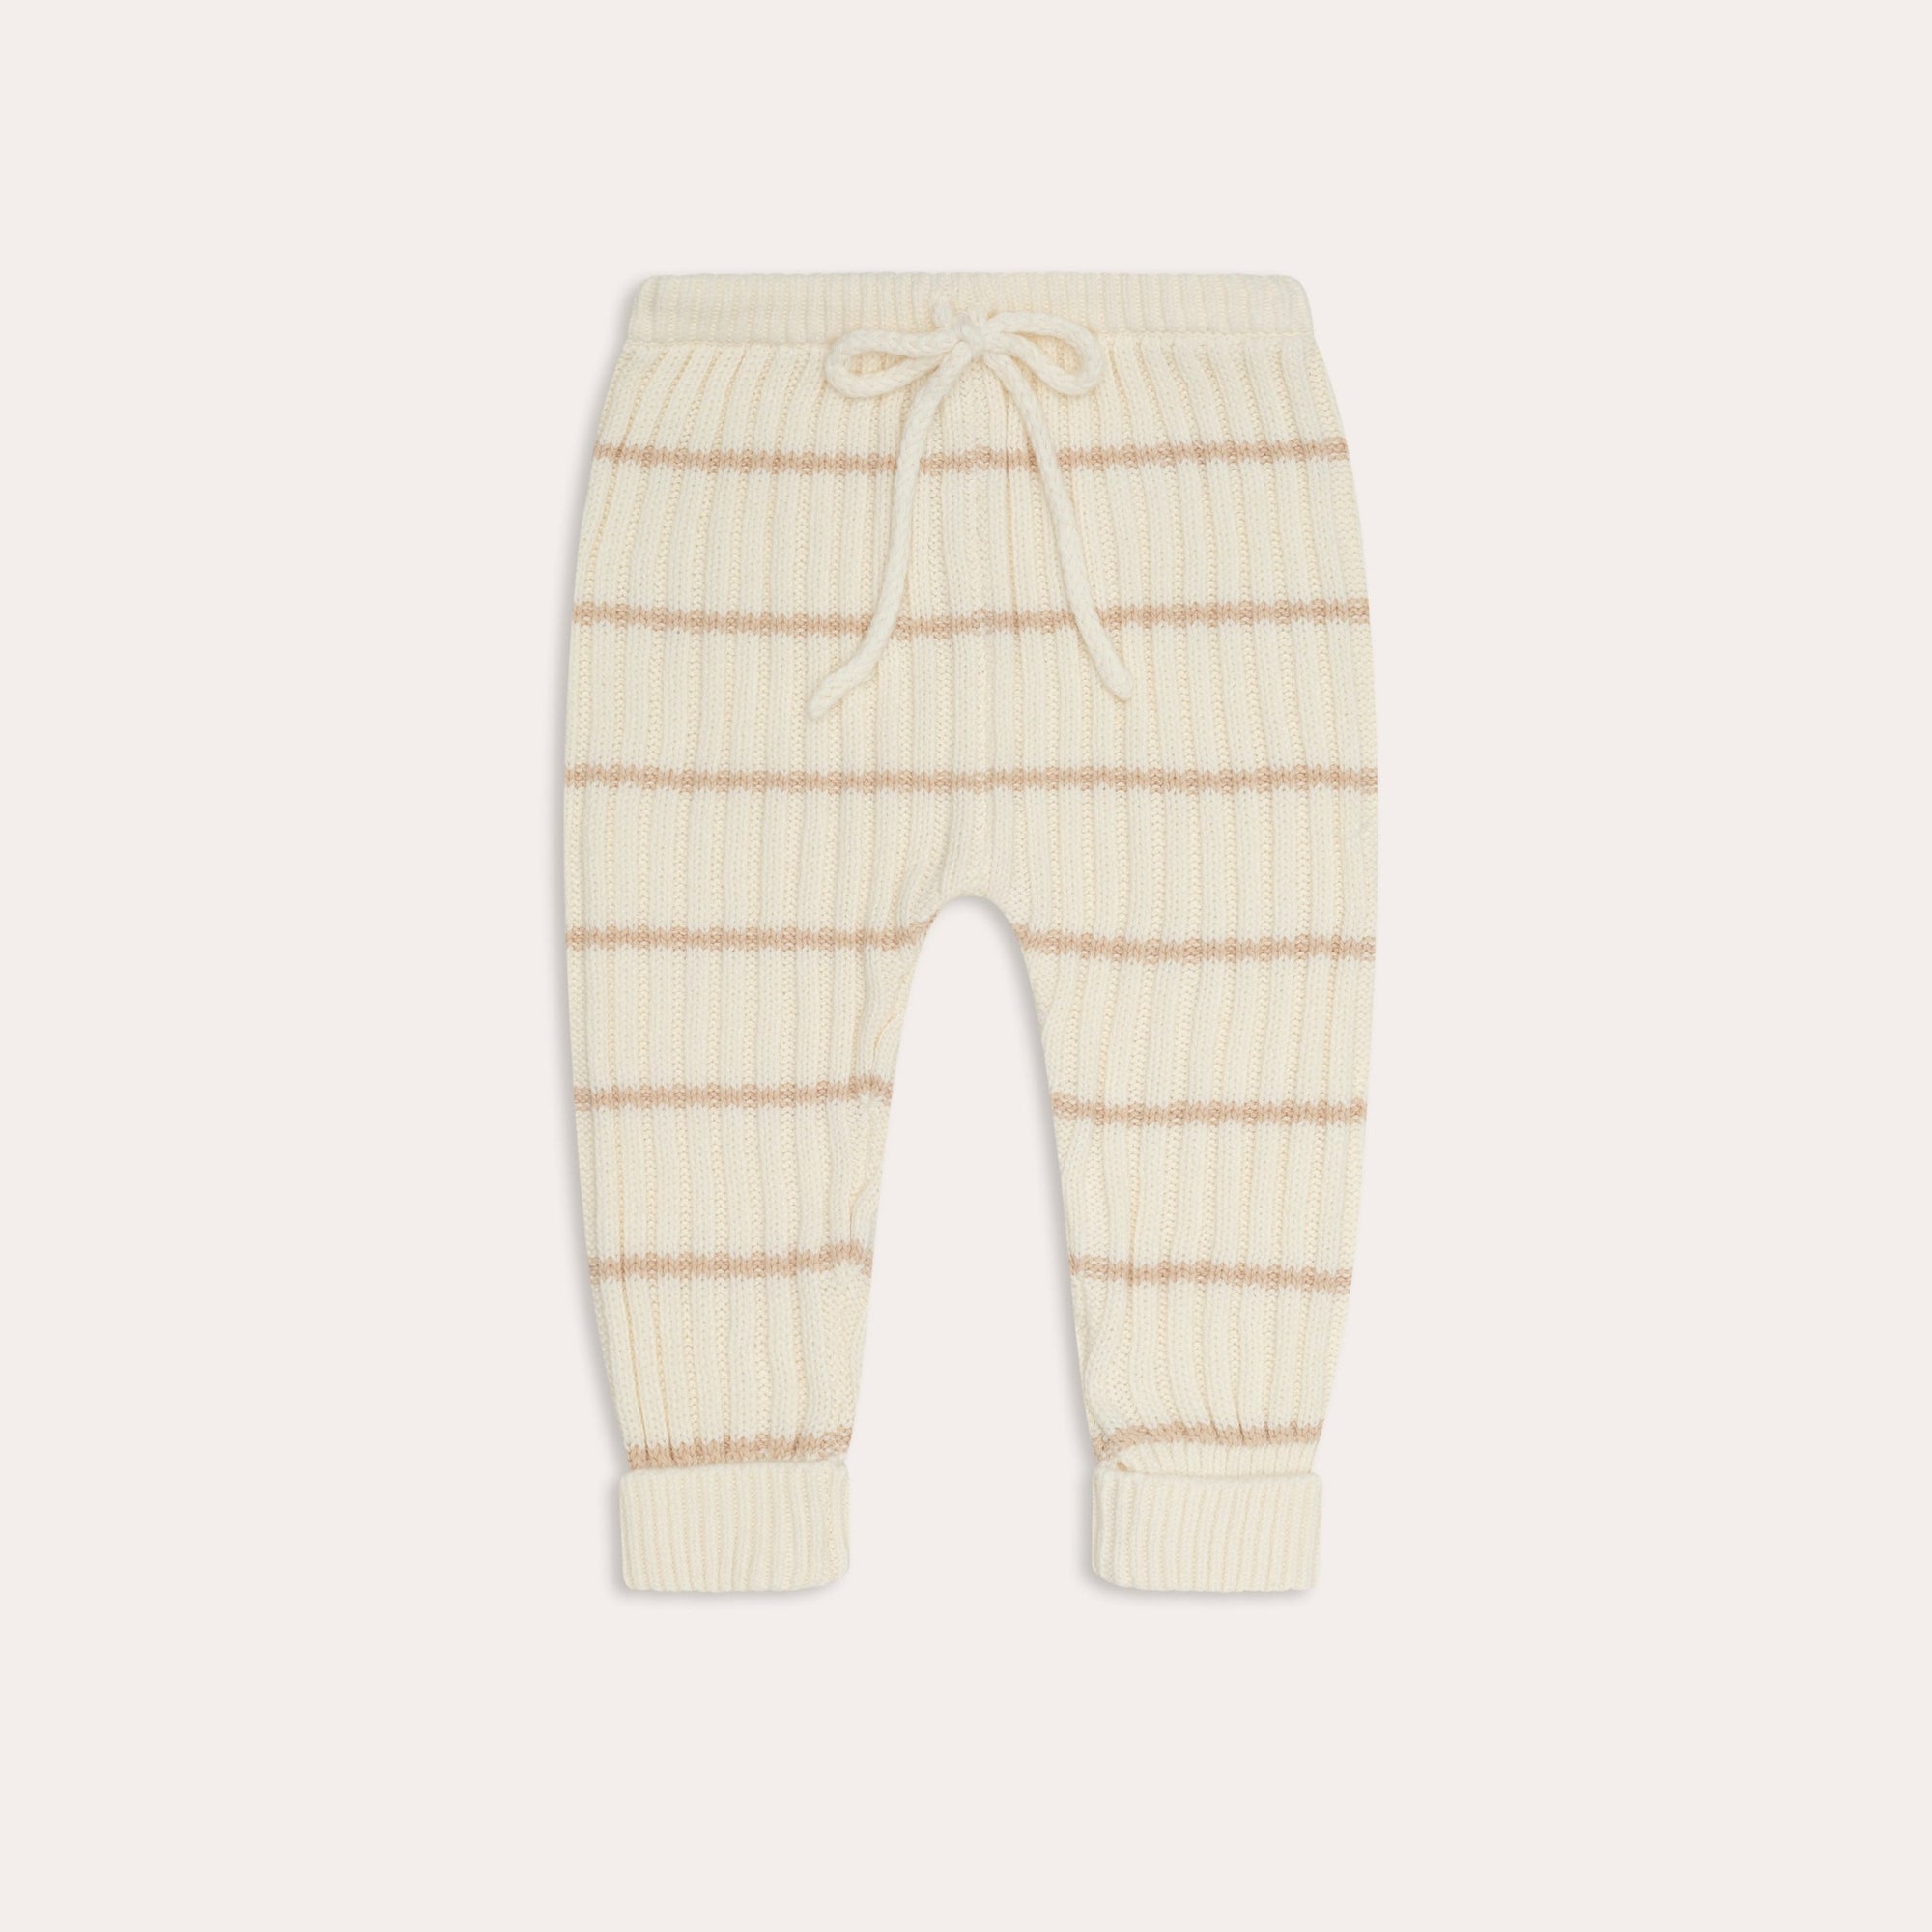 Illoura the Label illoura knit joey pants | sand stripe, featuring an elasticated waistband with a drawstring and rolled-up cuffs, made from soft organic cotton.